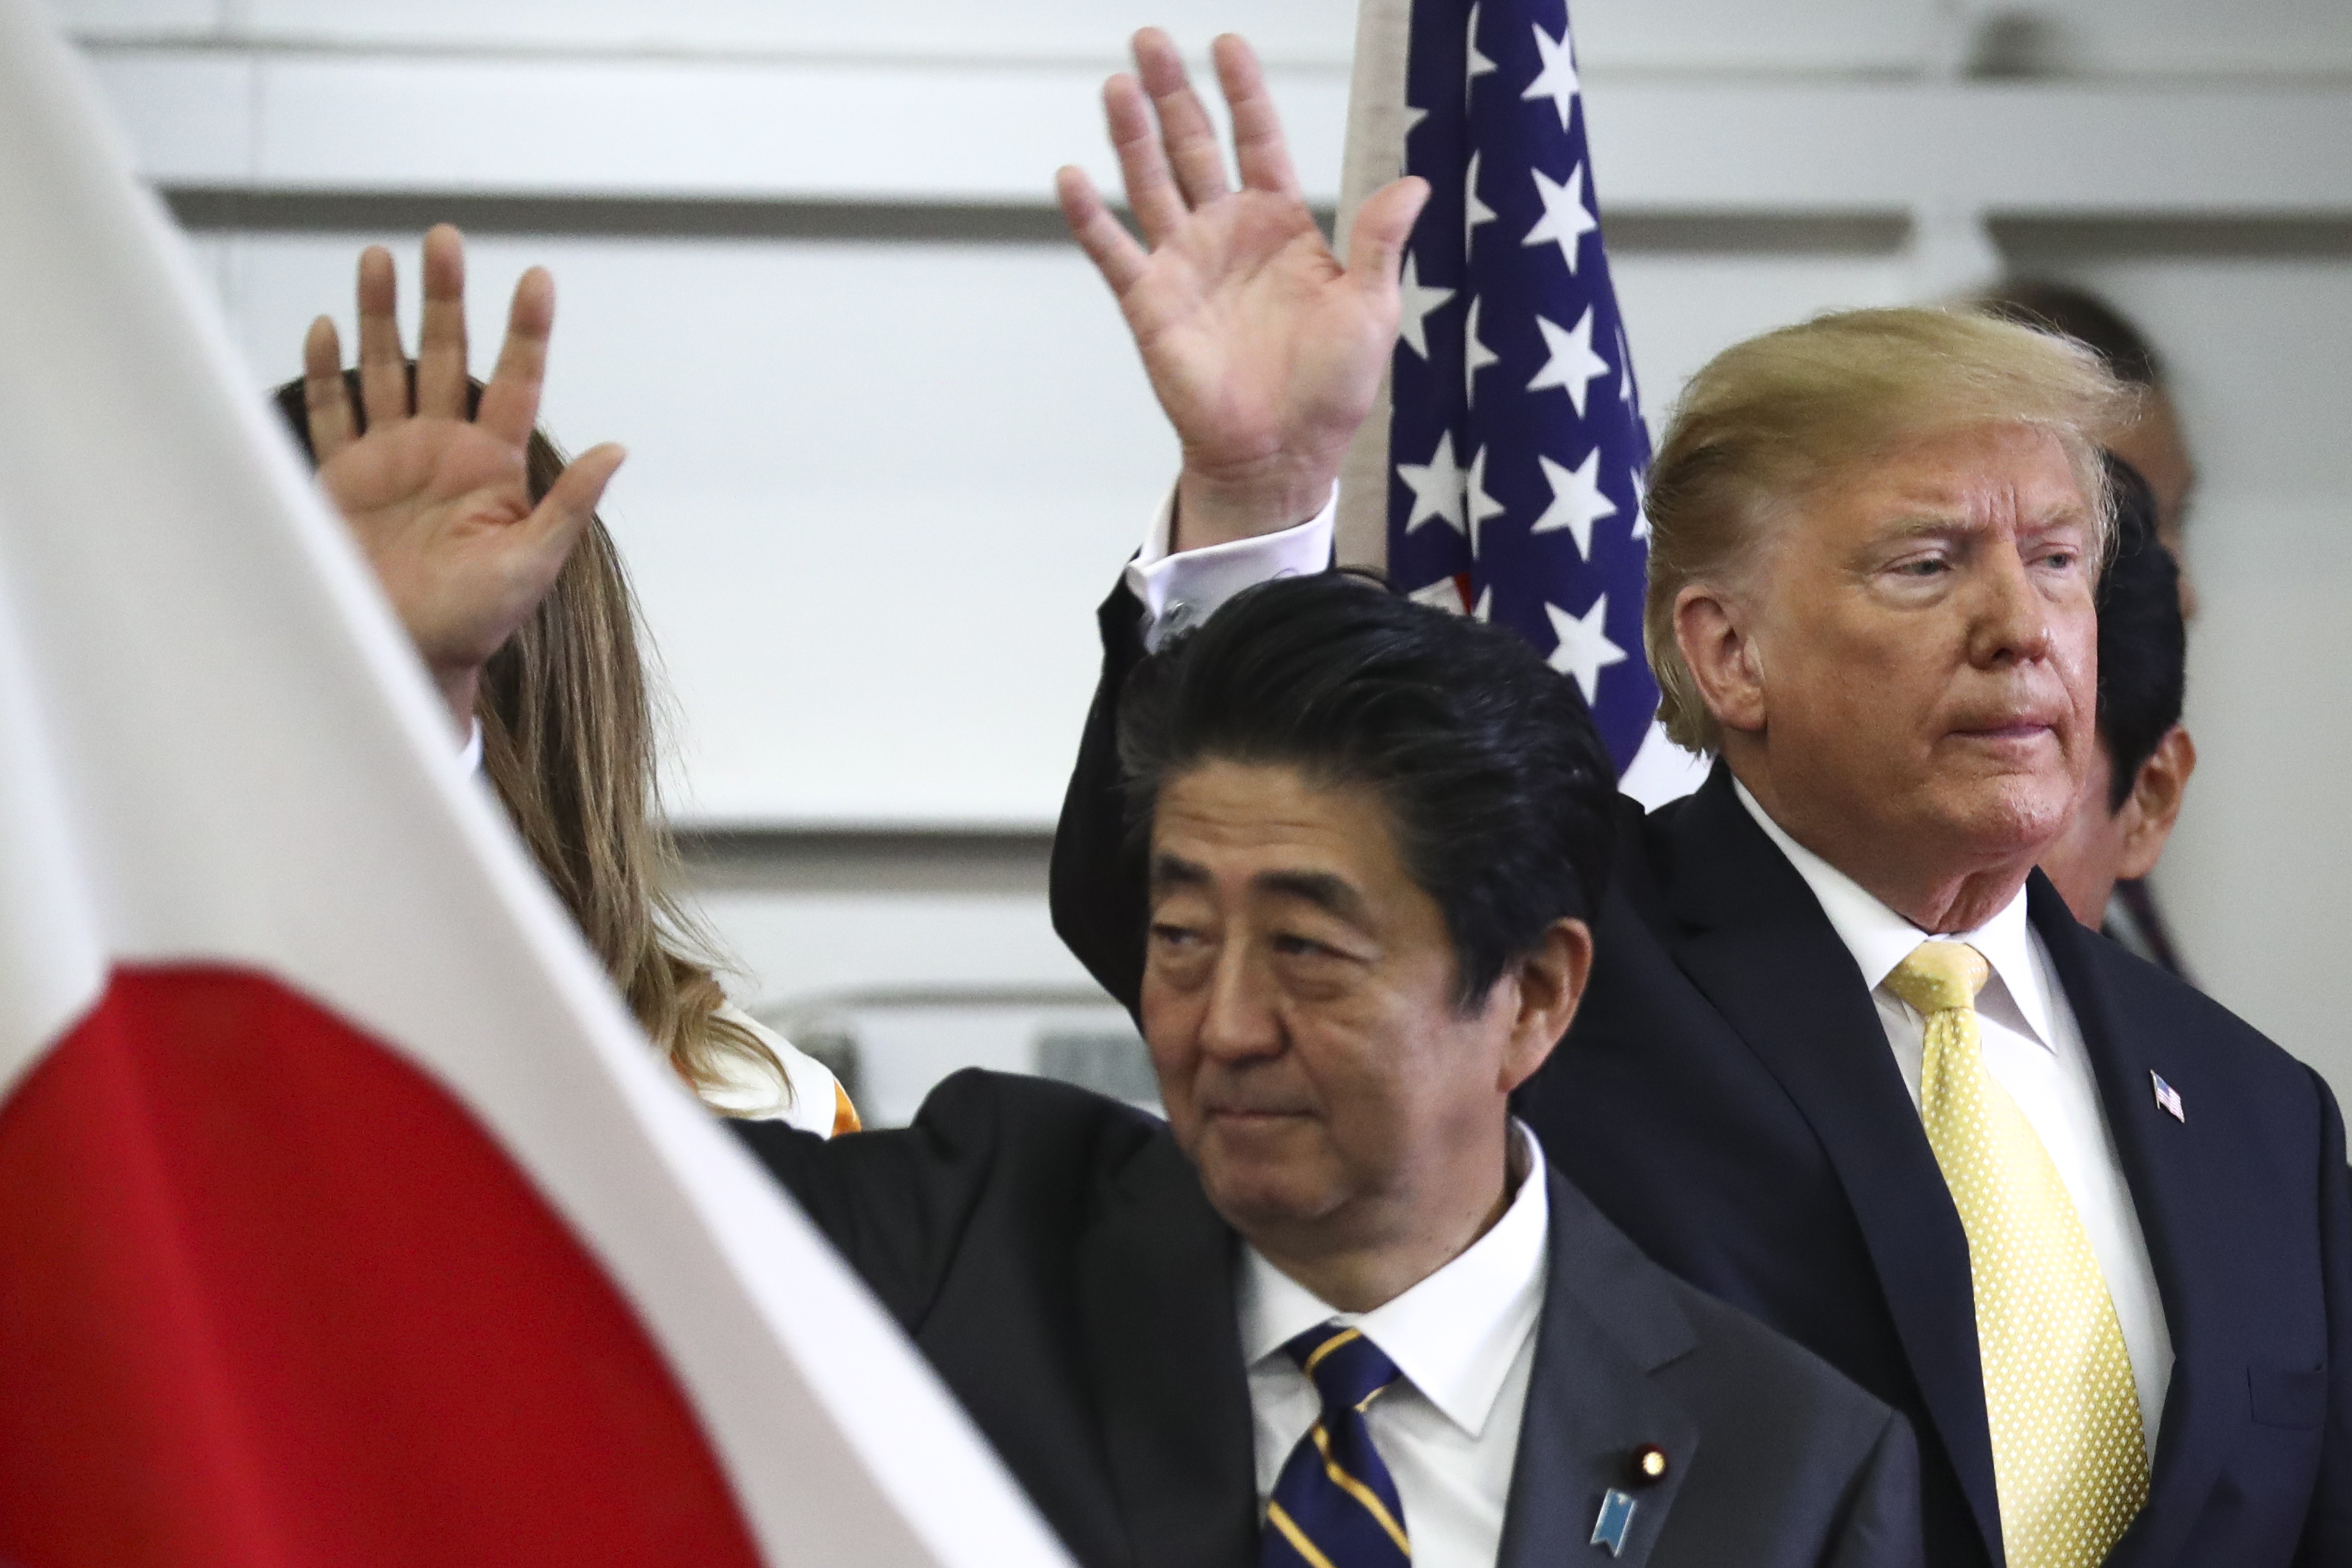 President Donald Trump and Japan’s Prime Minister Shinzo Abe wave after delivering a speech to Japanese and US troops on May 28, 2019 in Yokosuka, Japan.